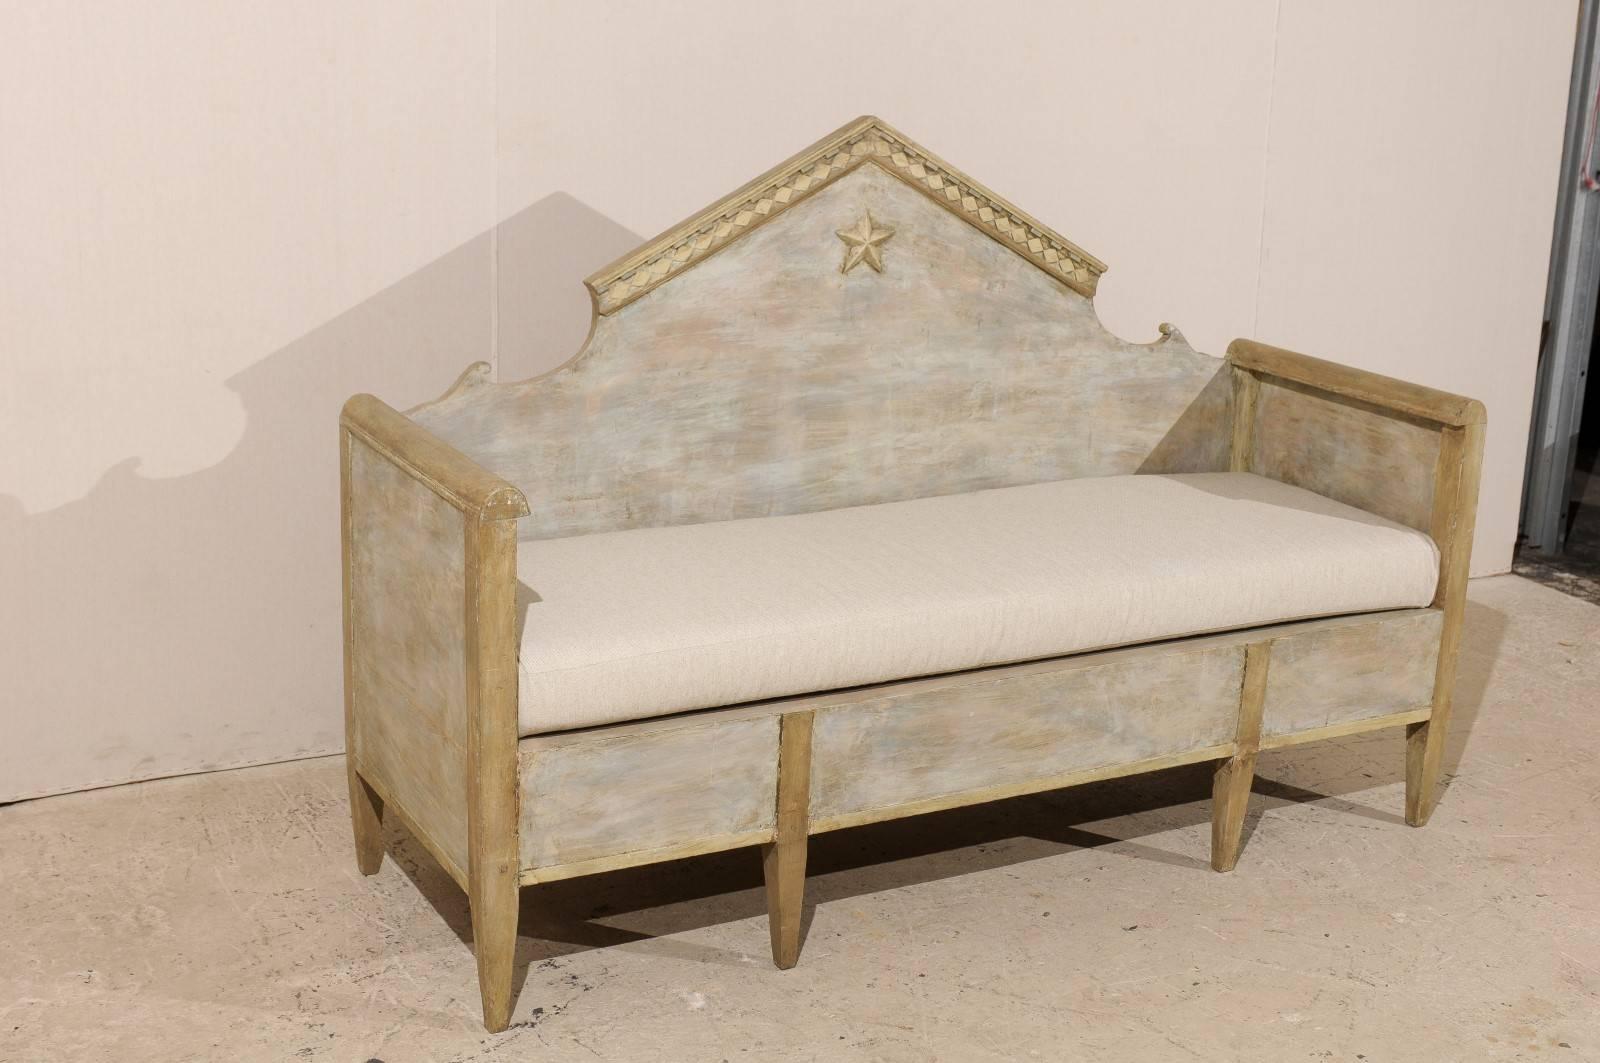 Carved Swedish Karl Johan Style Bench w/ Fabulous Pyramidal Back Pediment, Early 1800s For Sale